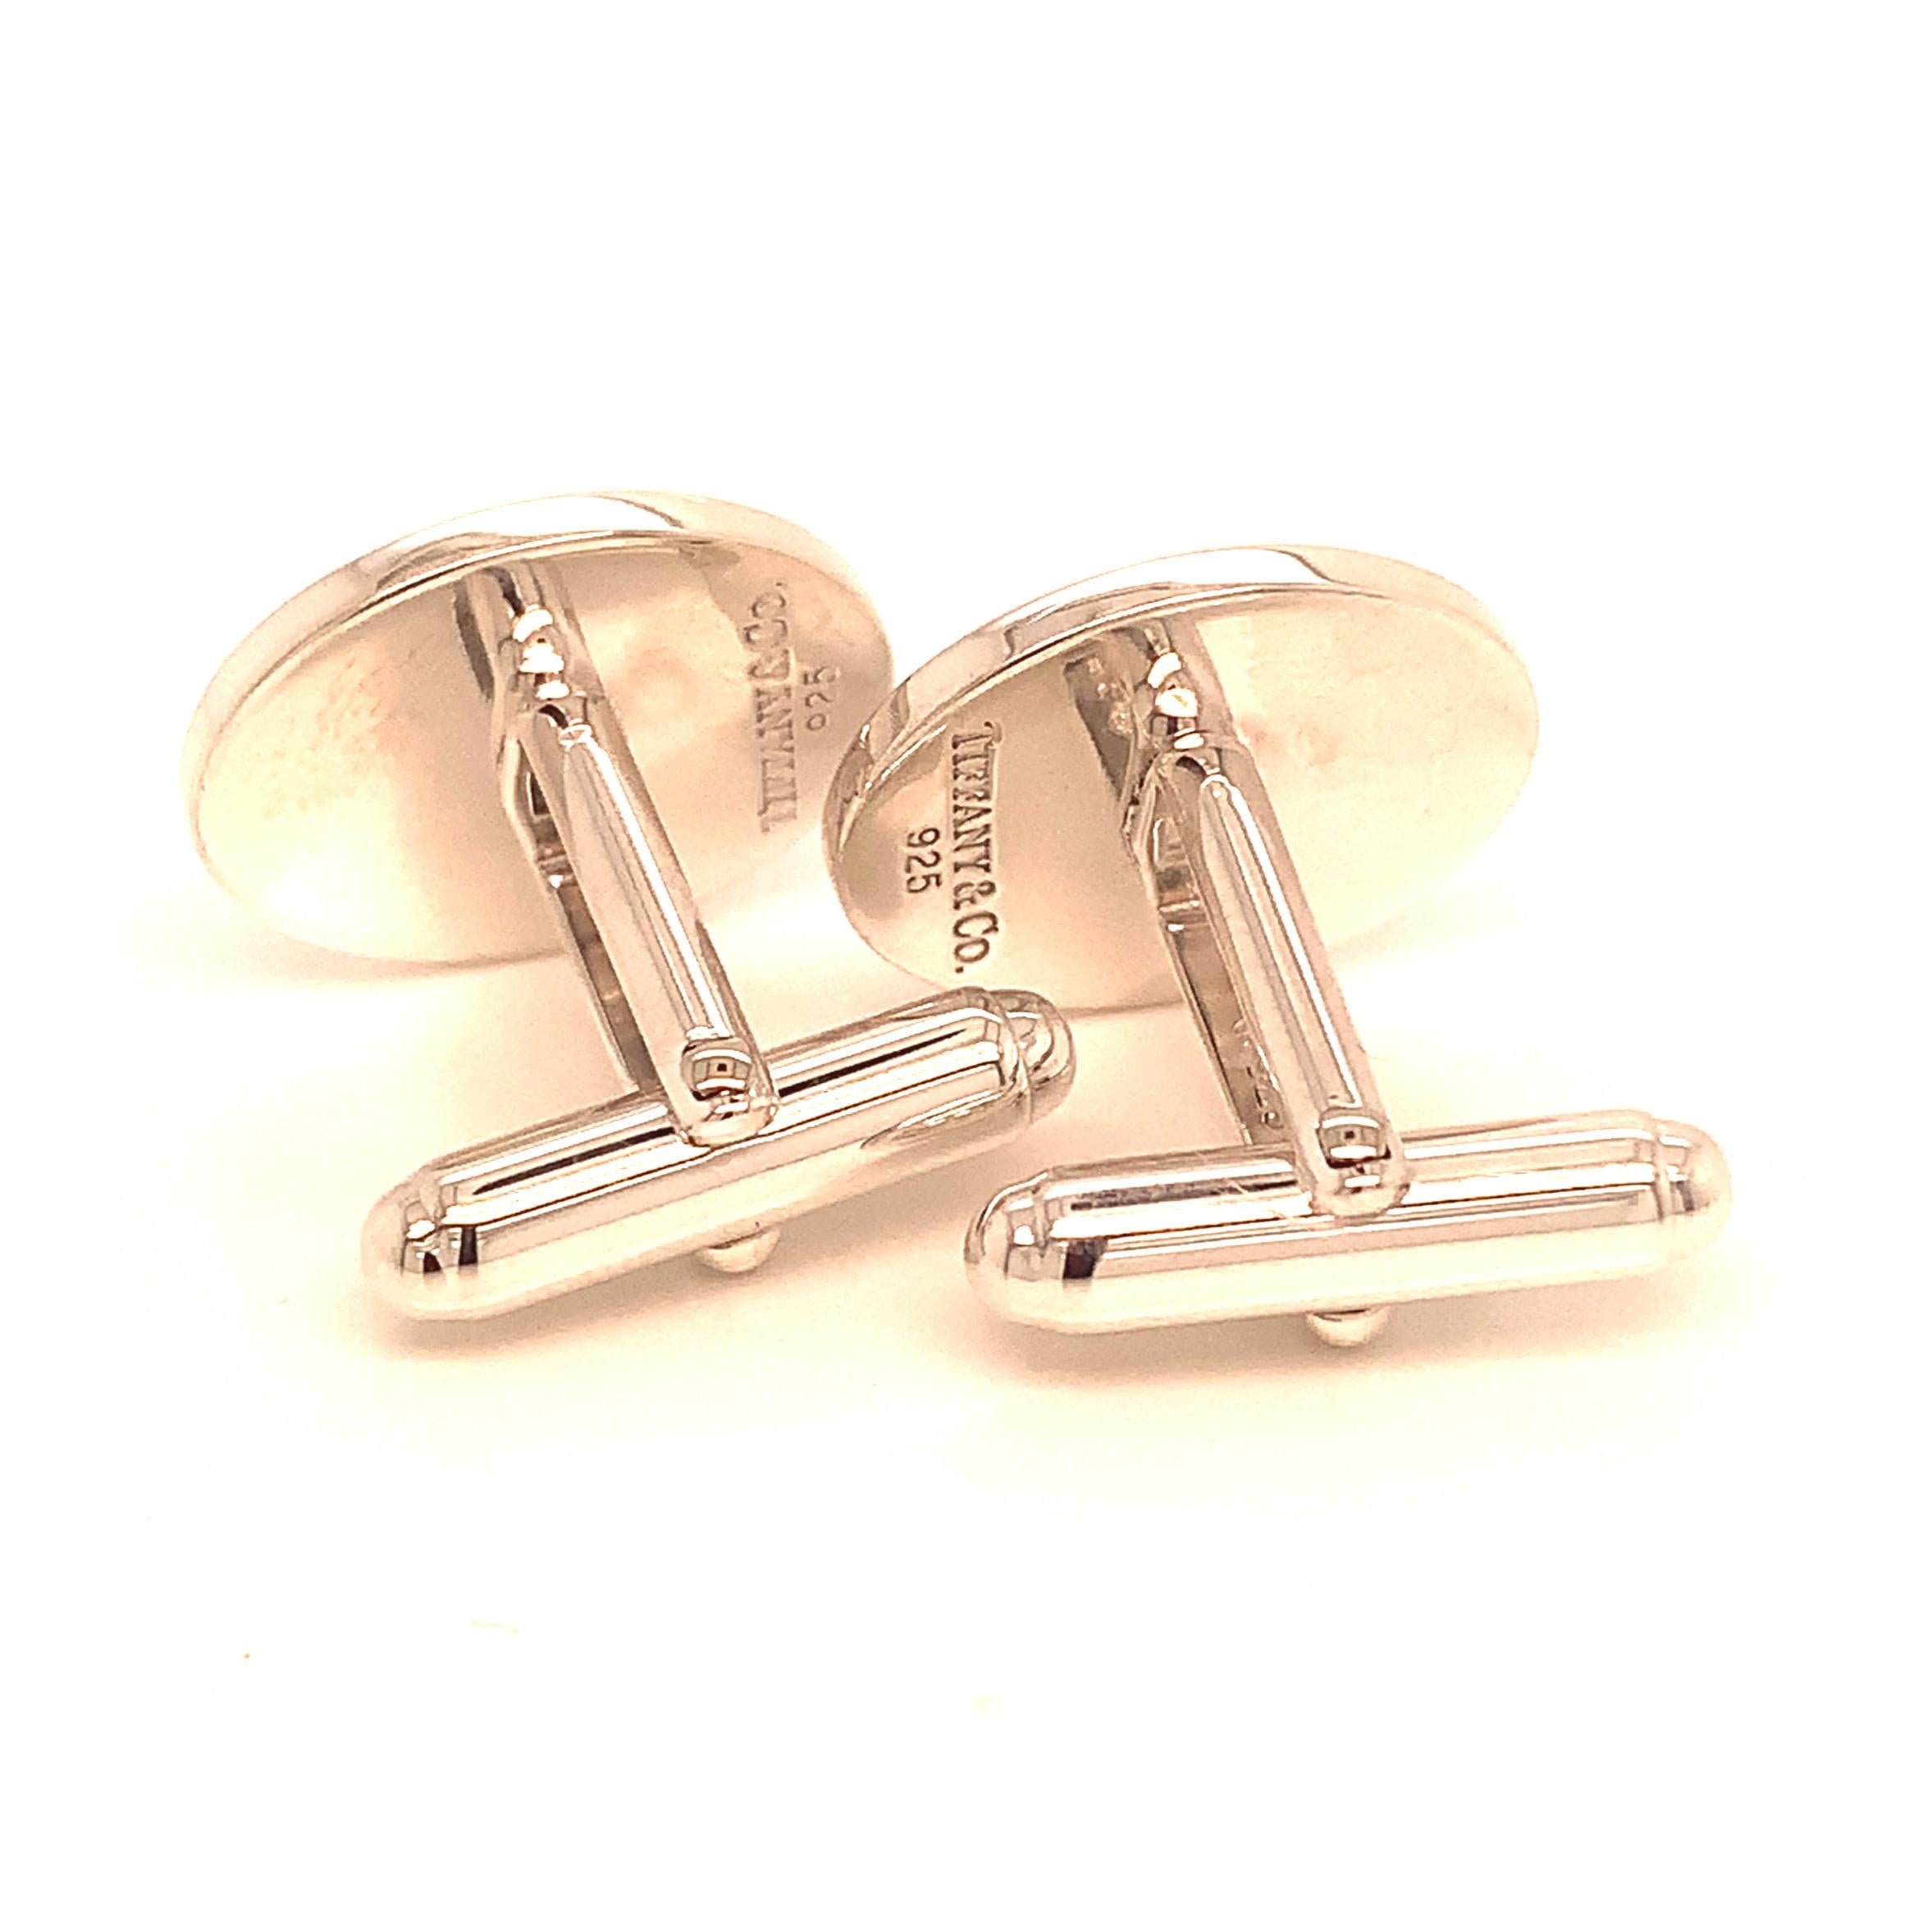 Tiffany & Co. Estate Sterling Silver Oval Cufflinks 12.10 Grams For Sale 4